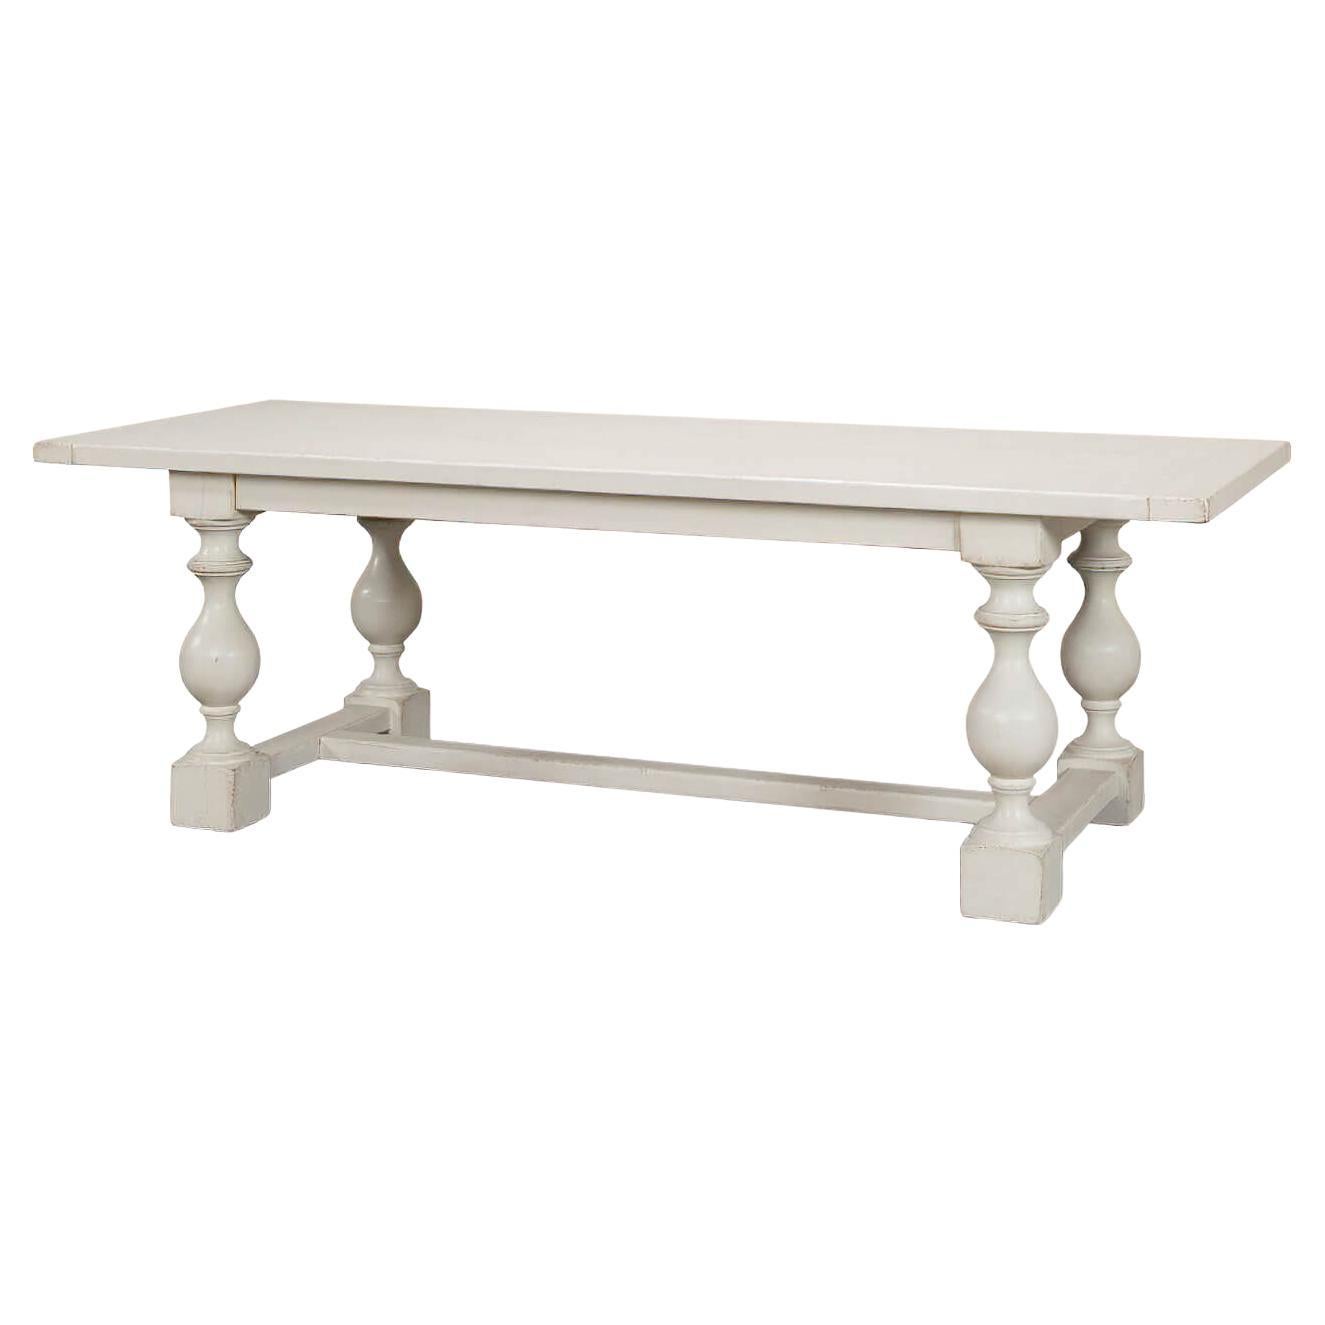 English Country Antique White Dining Table For Sale